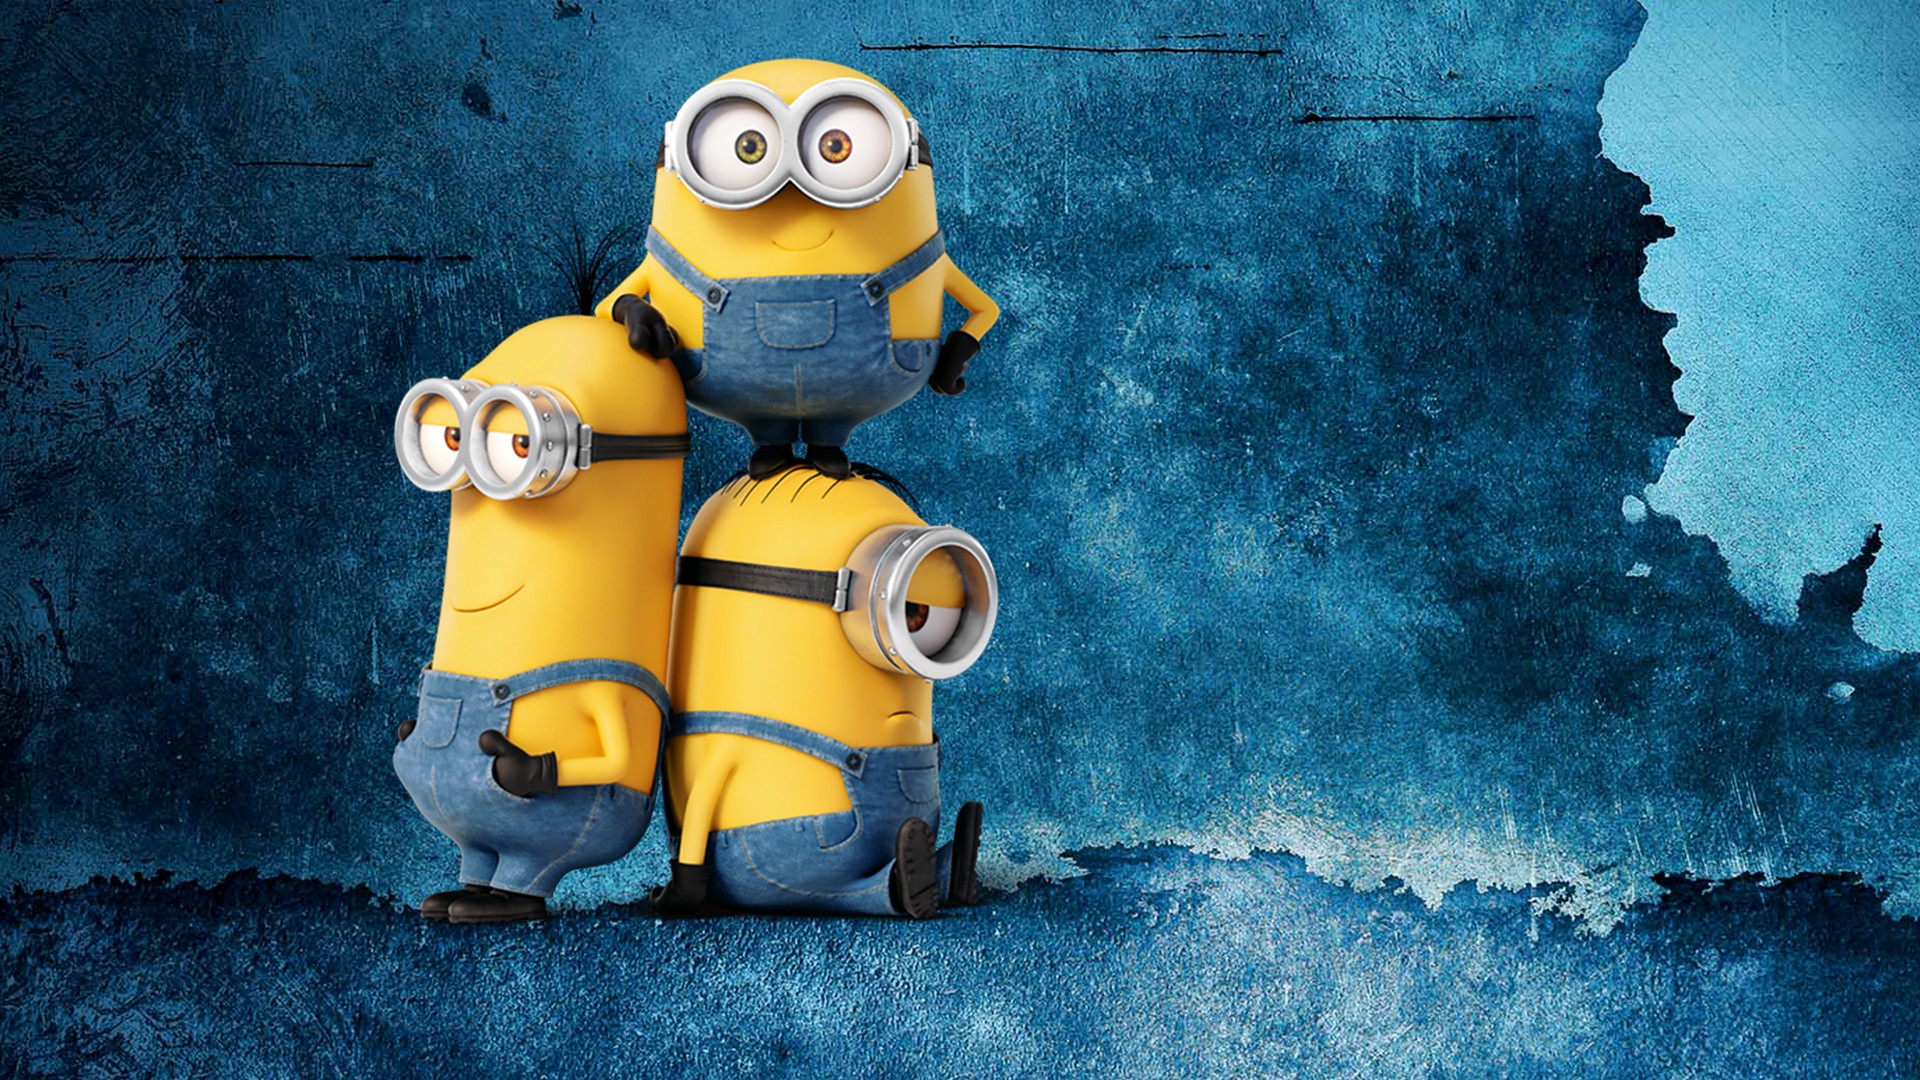 Minions Pc Backgrounds - Minions Wallpaper Hd For Iphone - HD Wallpaper 